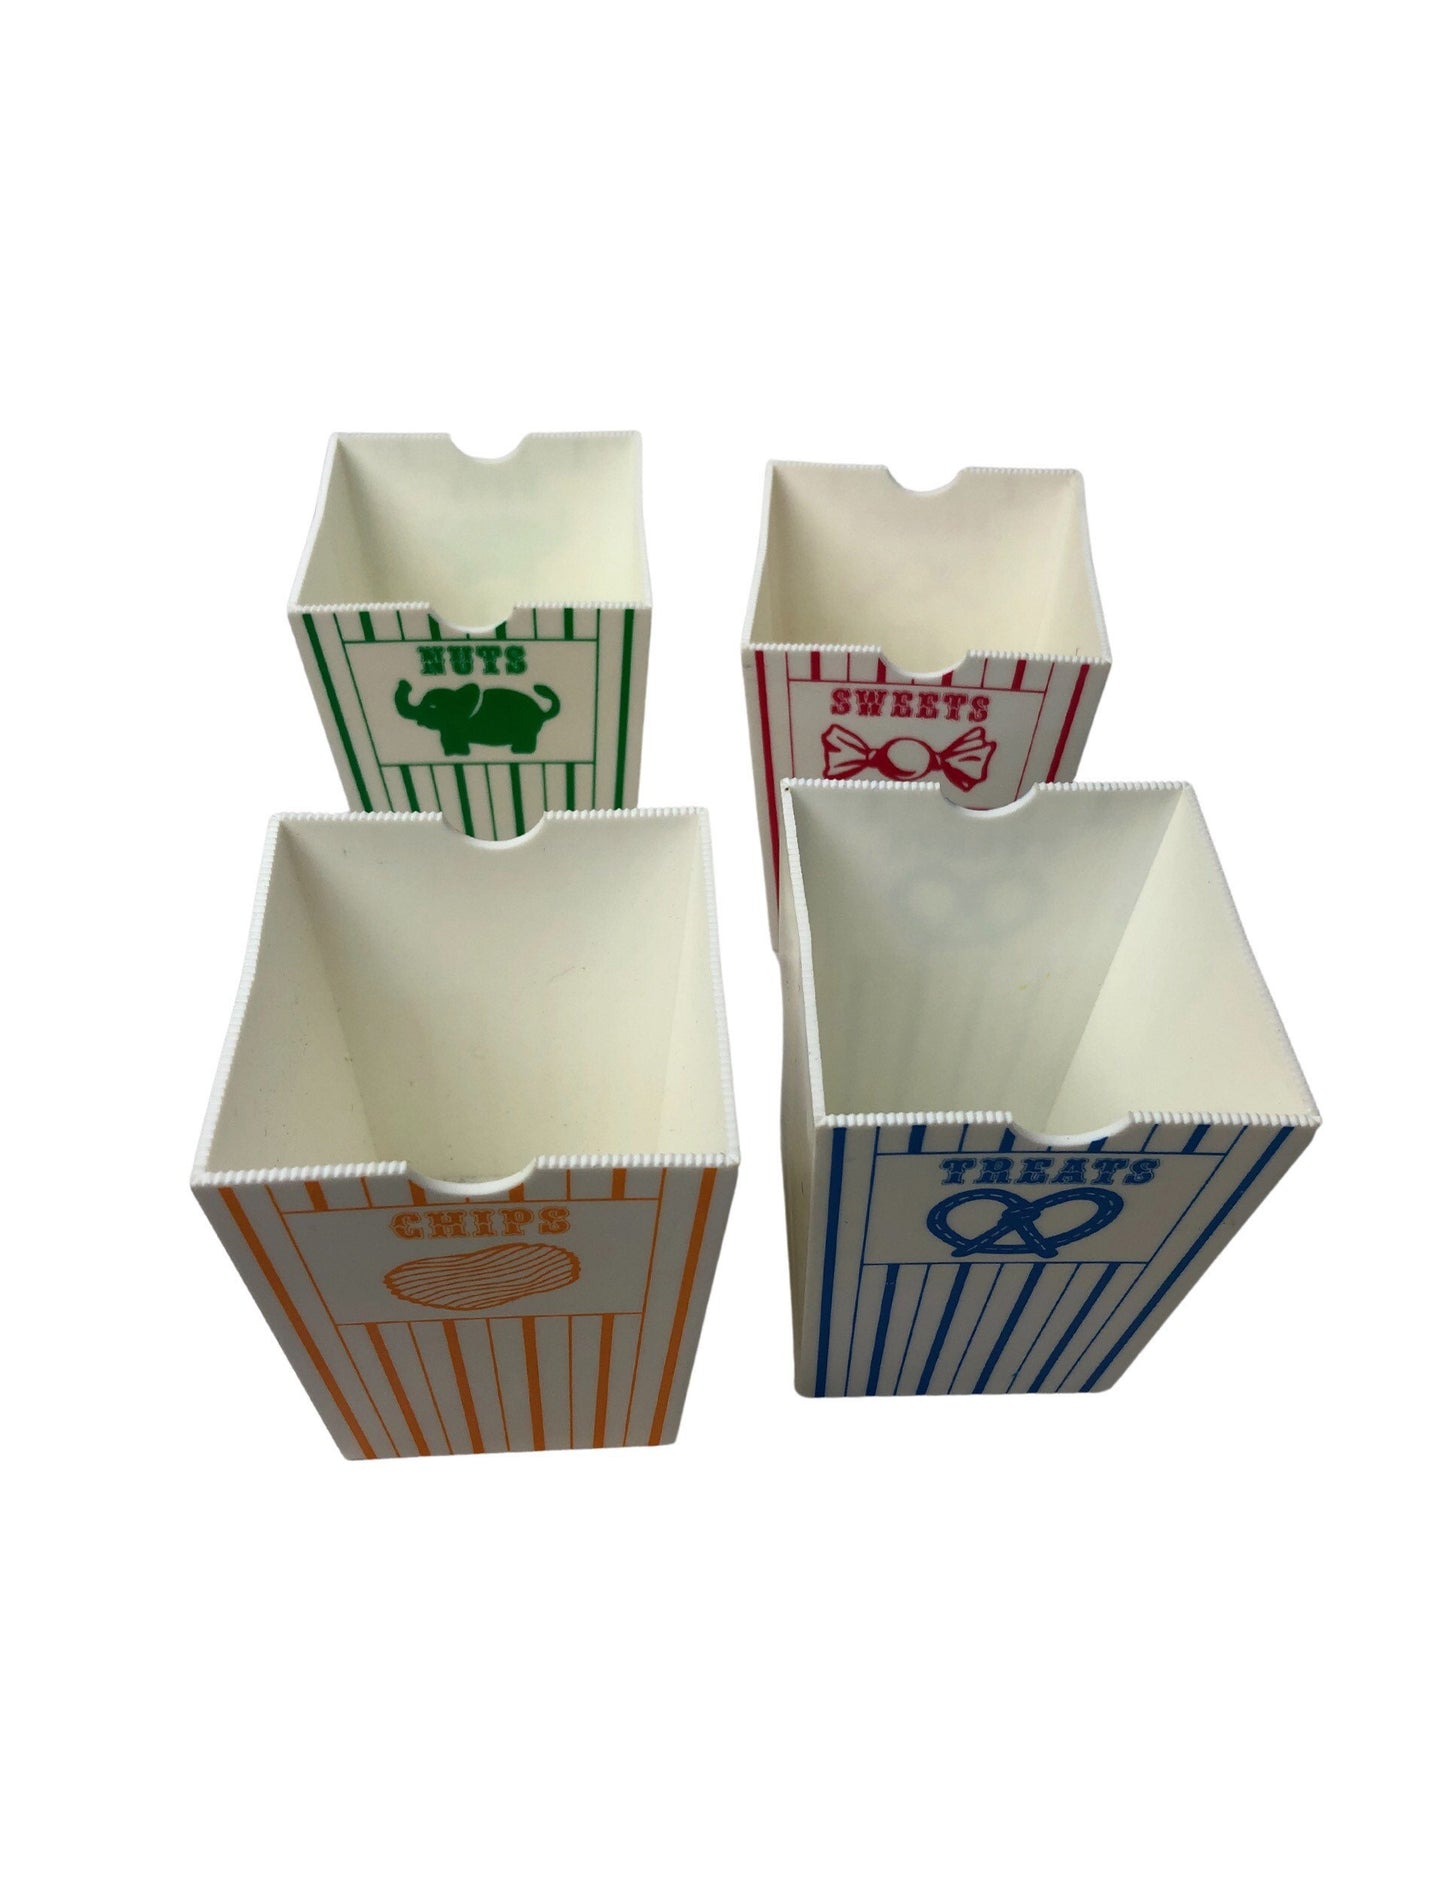 1960’s Set of 4 CIRCUS Nuts, Treats, Sweets, Chips Plastic Popcorn Snack Containers